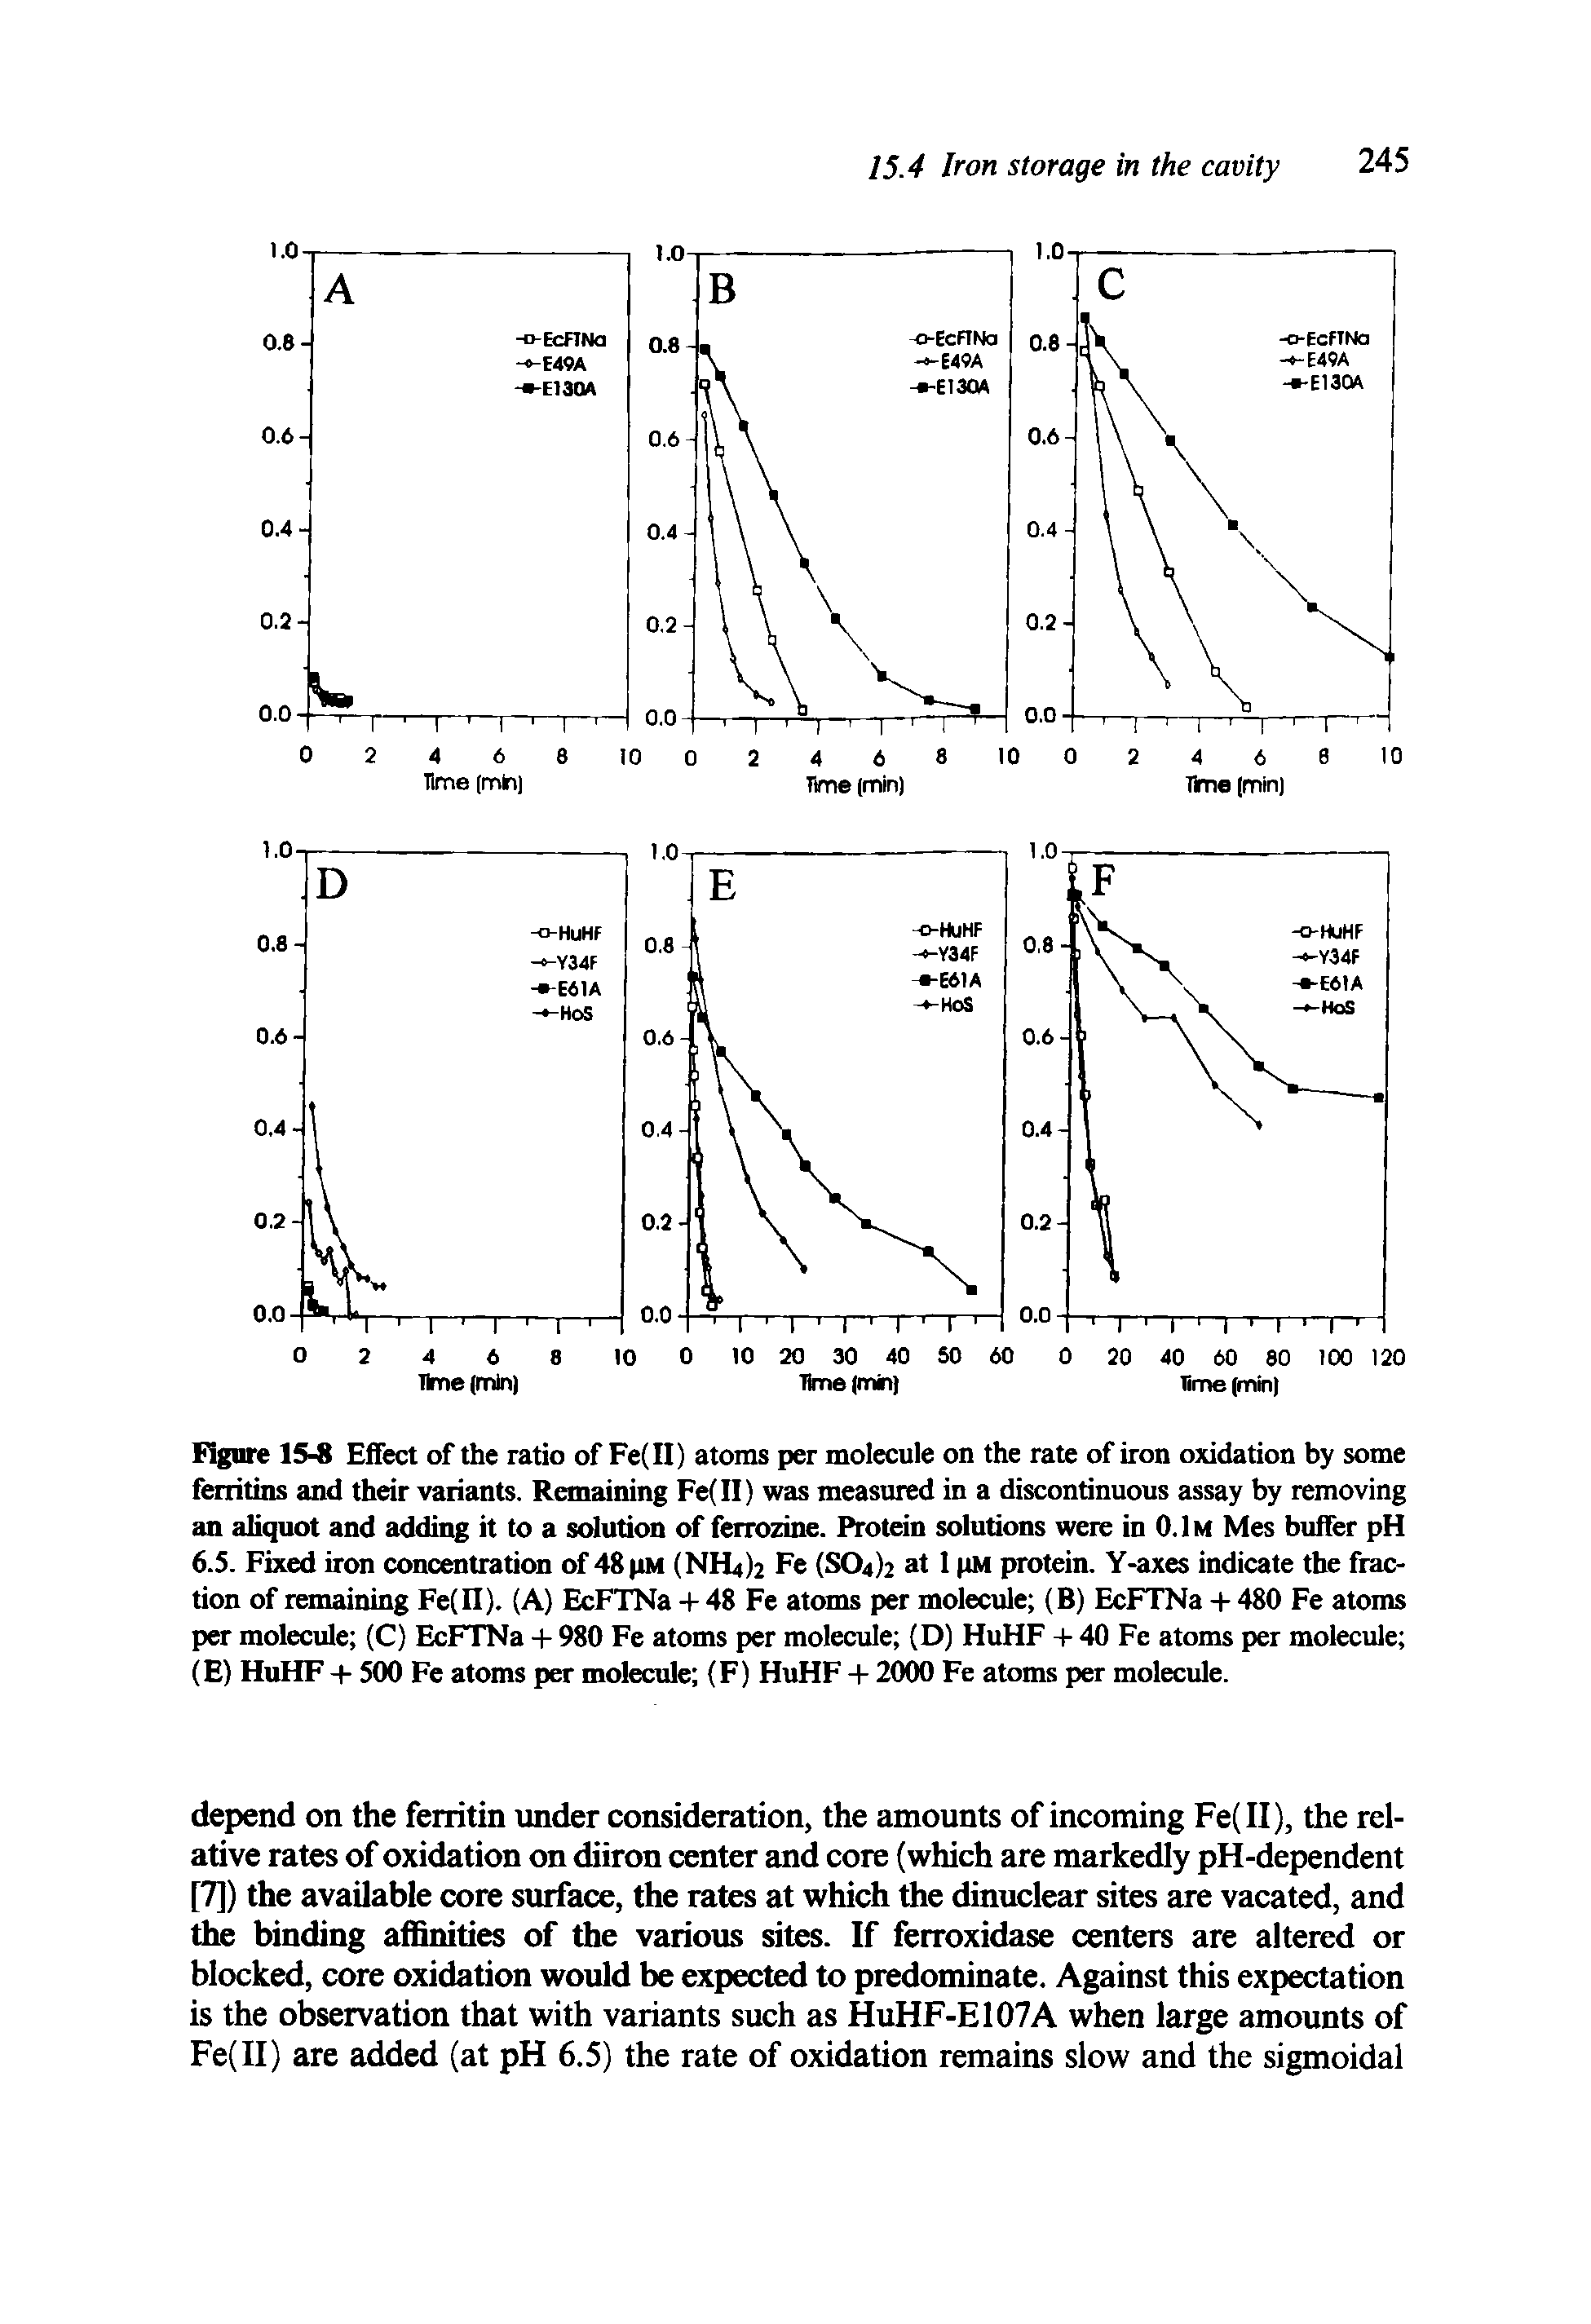 Figure 15-8 Effect of the ratio of Fe(II) atoms per molecule on the rate of iron oxidation by some ferritins and their variants. Remaining Fe(II) was measured in a discontinuous assay by removing an aliquot and adding it to a solution of ferrozine. Protein solutions were in 0.1m Mes buffer pH 6.5. Fixed iron concentration of 48pM (NH4)2 Fe (804)2 at 1 pM protein. Y-axes indicate the fraction of remaining Fe(II). (A) EcFTNa -f 48 Fe atoms per molecule (B) EcFTNa - - 480 Fe atoms per molecule (C) EcFTNa - - 980 Fe atoms per molecule (D) HuHF + 40 Fe atoms per molecule (E) HuHF -(- 500 Fe atoms per molecule (F) HuHF -1- 2000 Fe atoms per molecule.